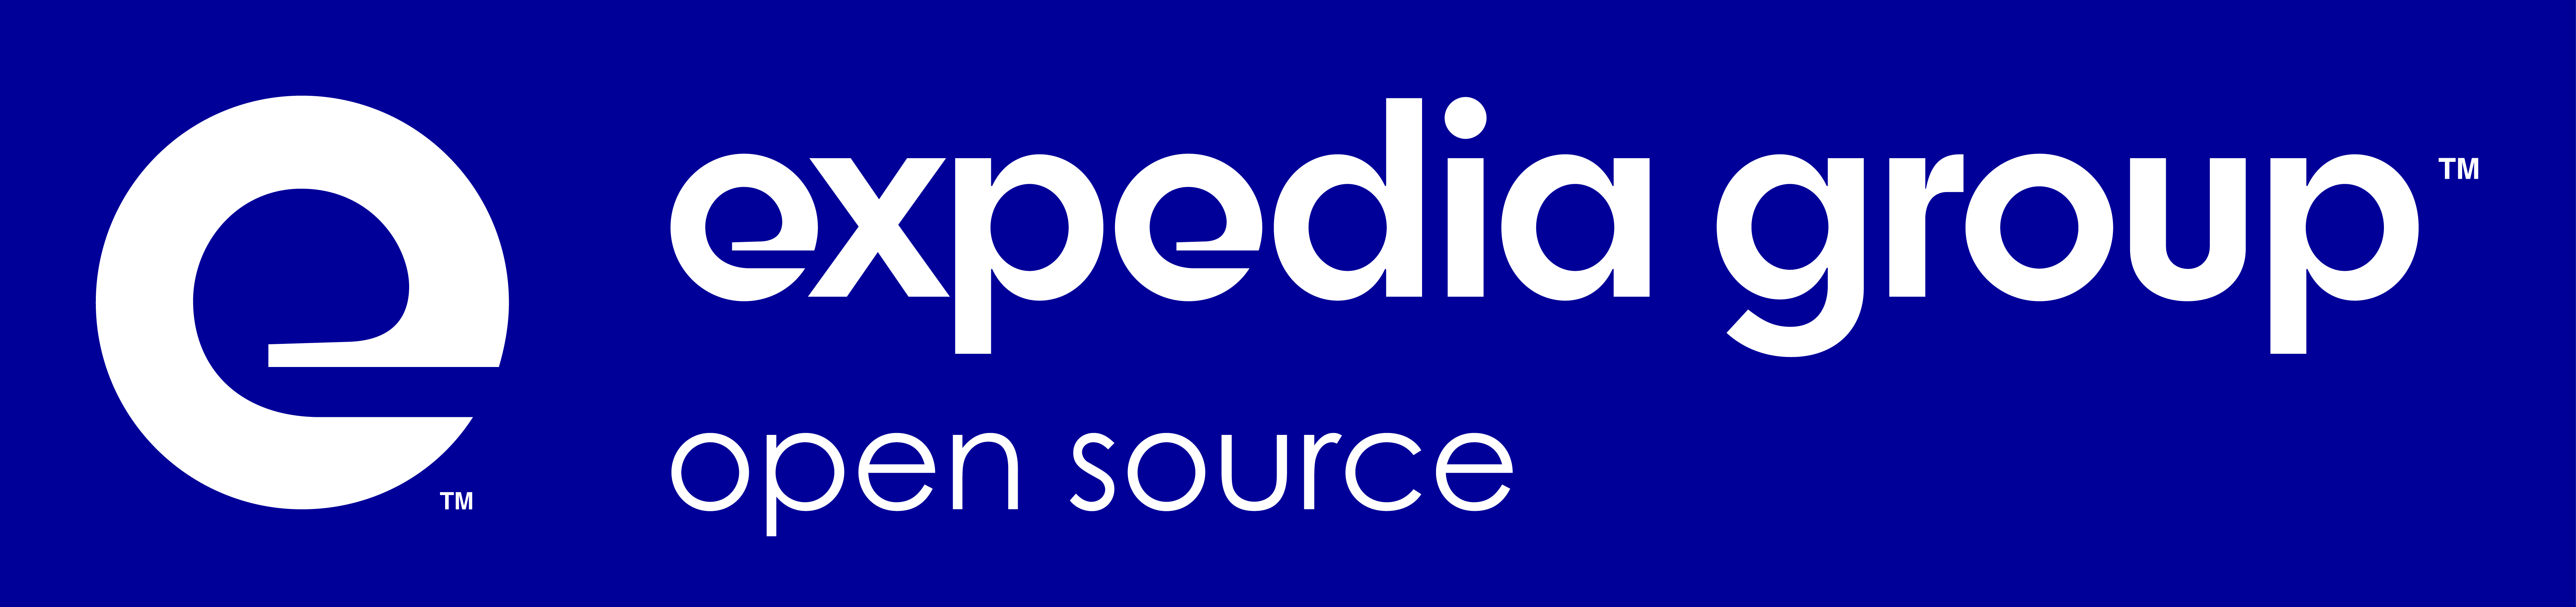 Expedia Group Open Source